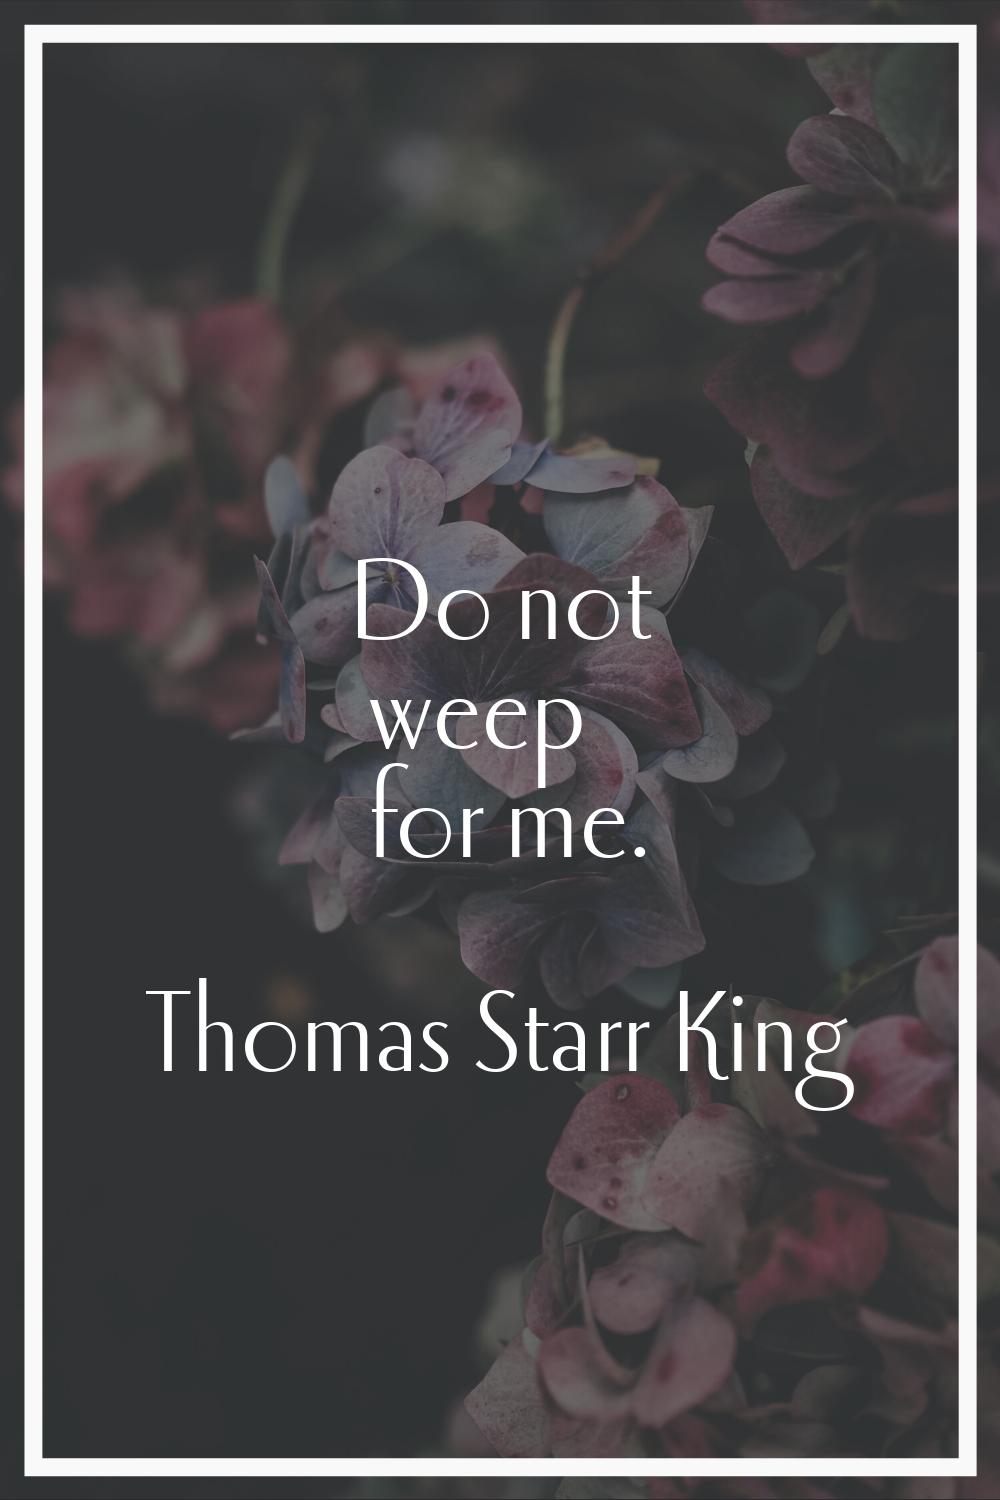 Do not weep for me.